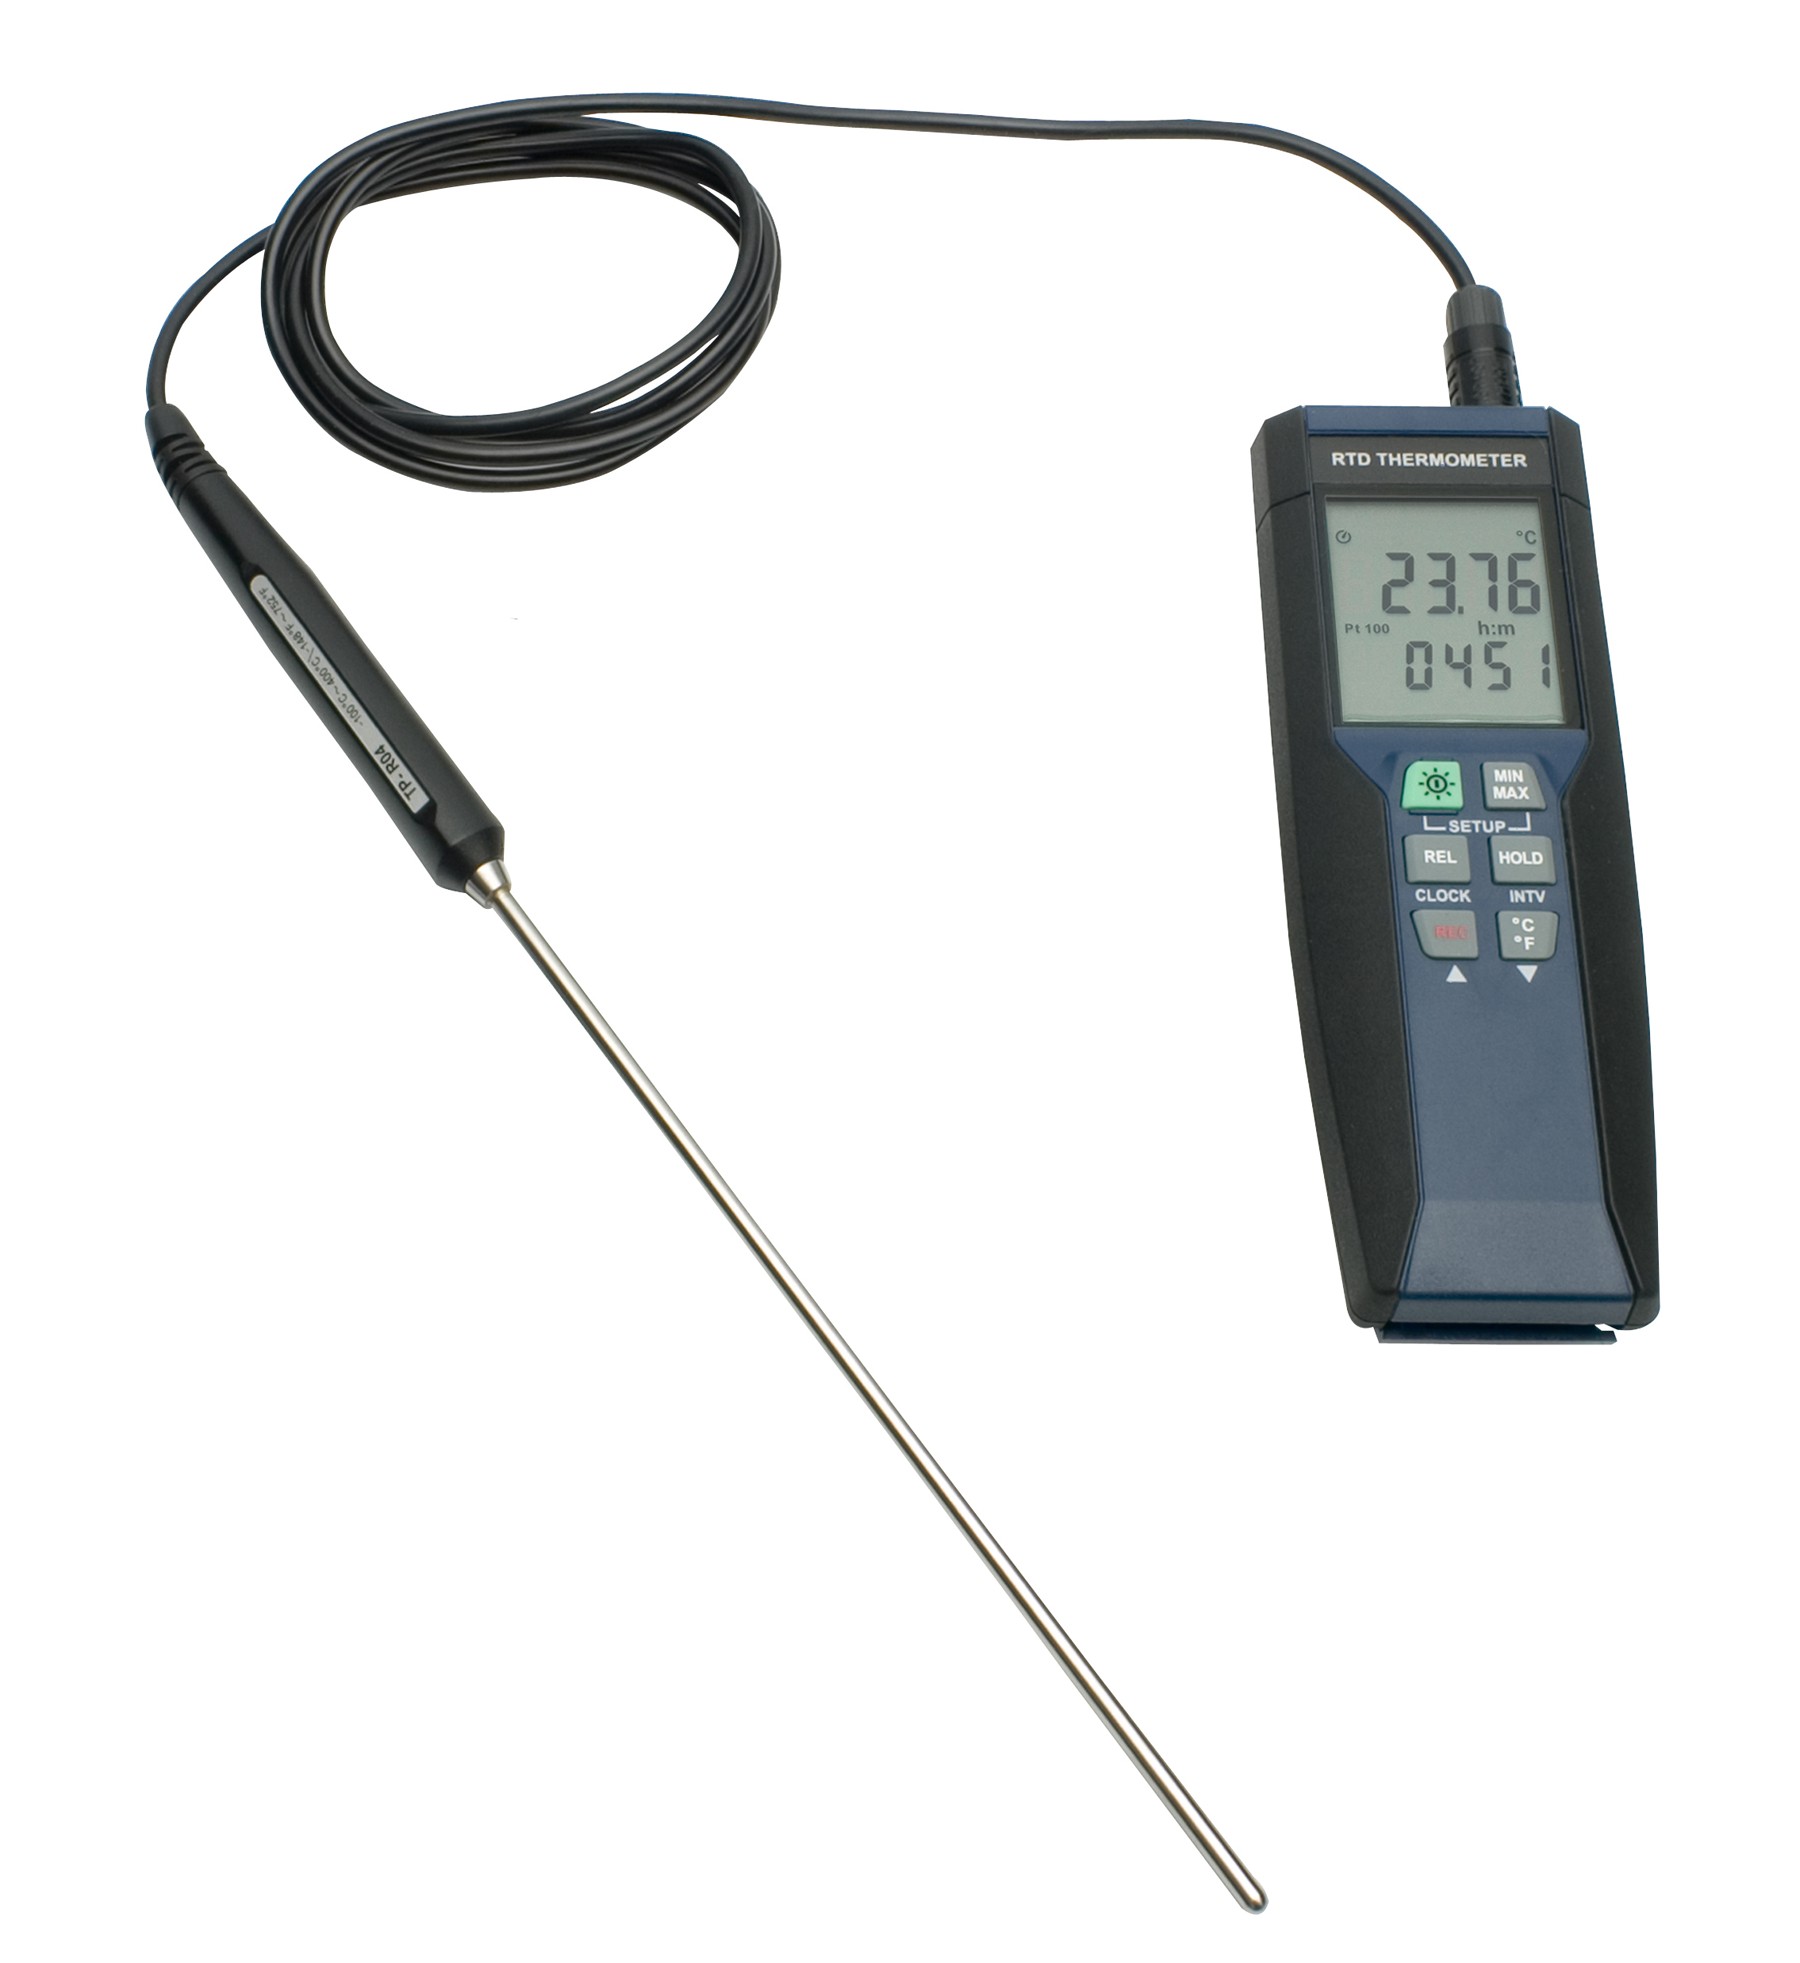 Wired digital thermometer with probe - Various small equipment: thermometers  - Analysis - Measurement - Microbiology 